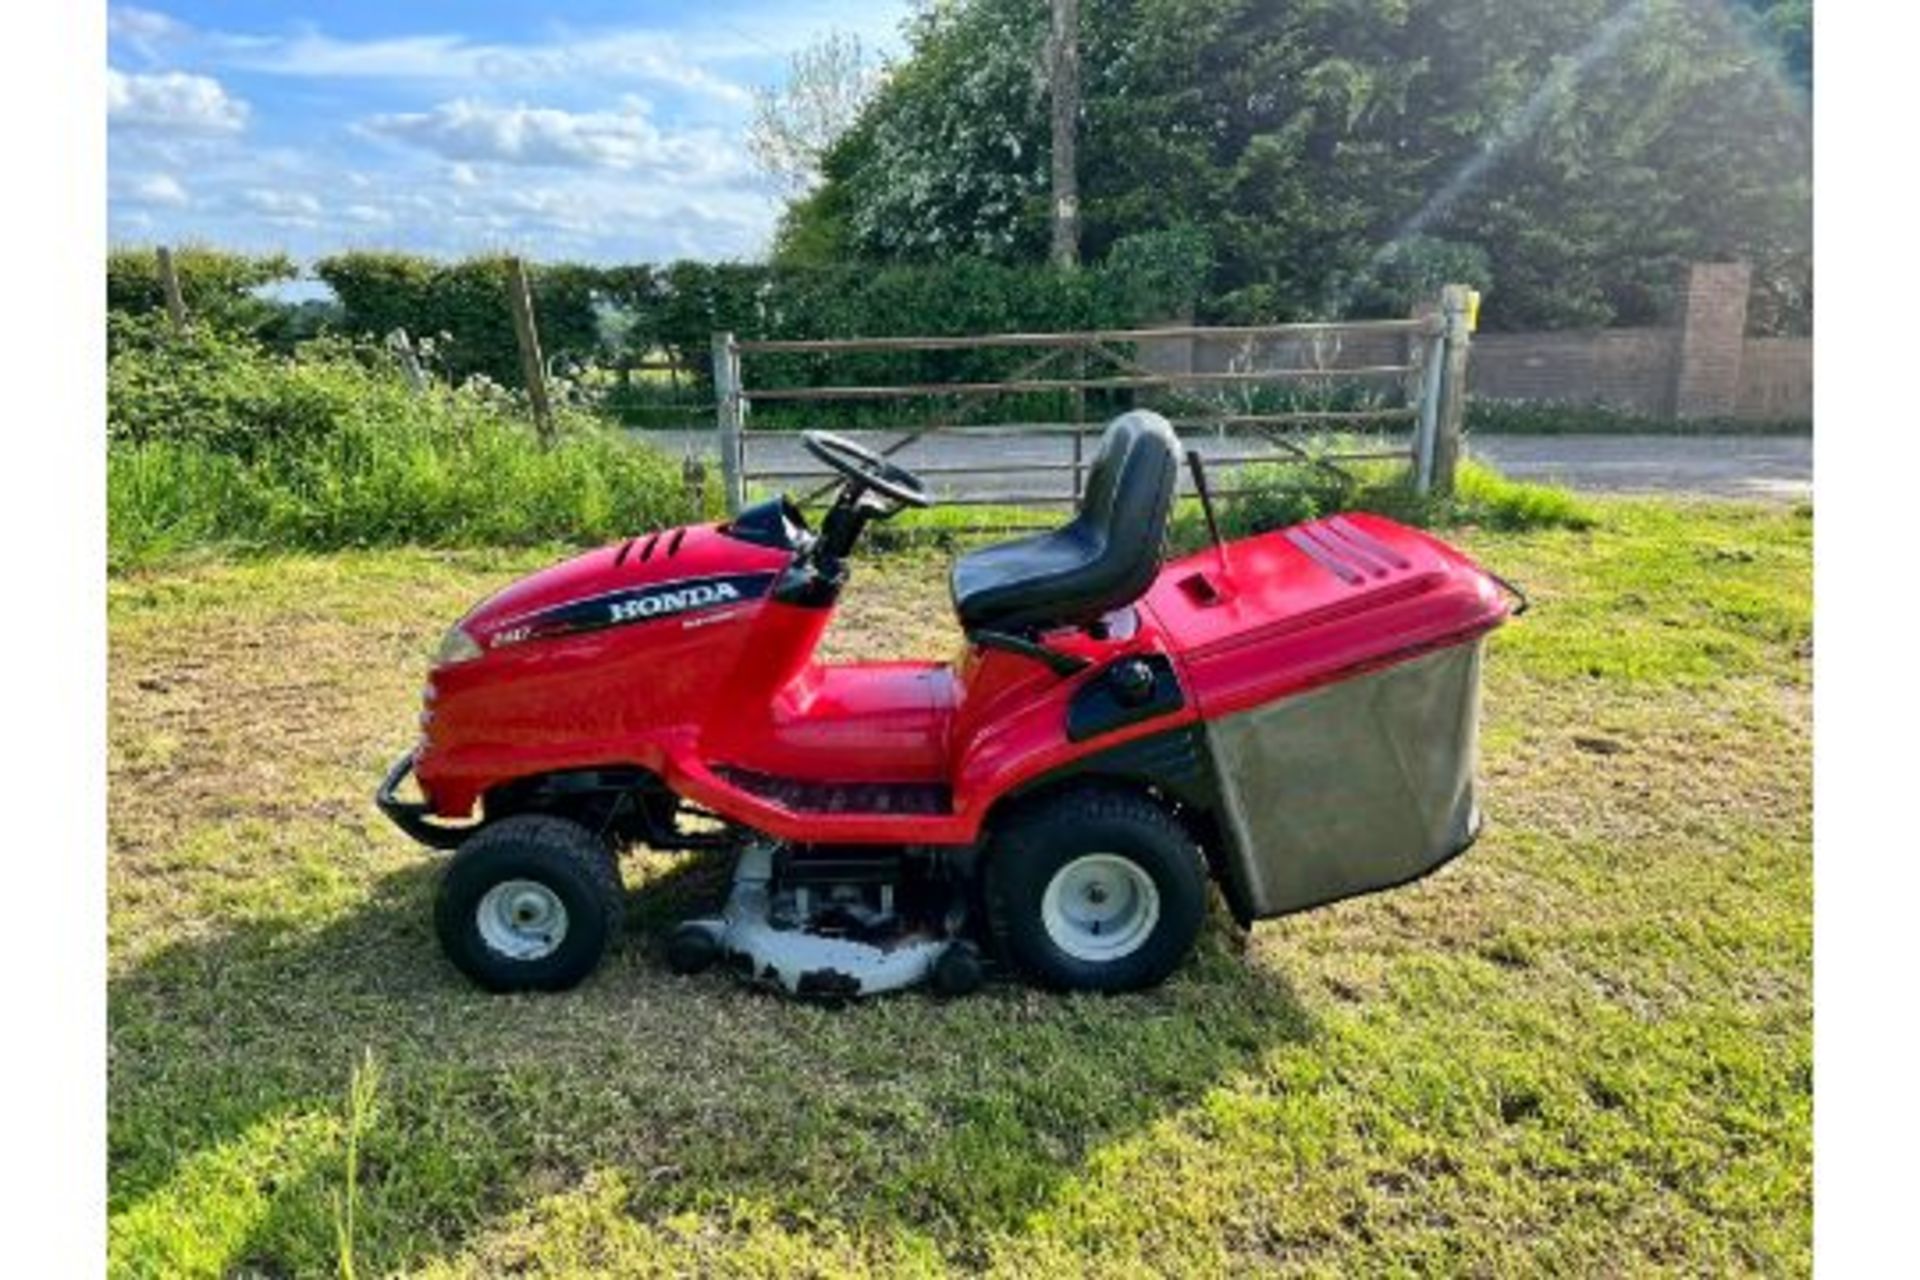 Honda 2417 Ride On Mower With Rear Collector, Runs Drives Cuts And Collects "PLUS VAT" - Image 6 of 22